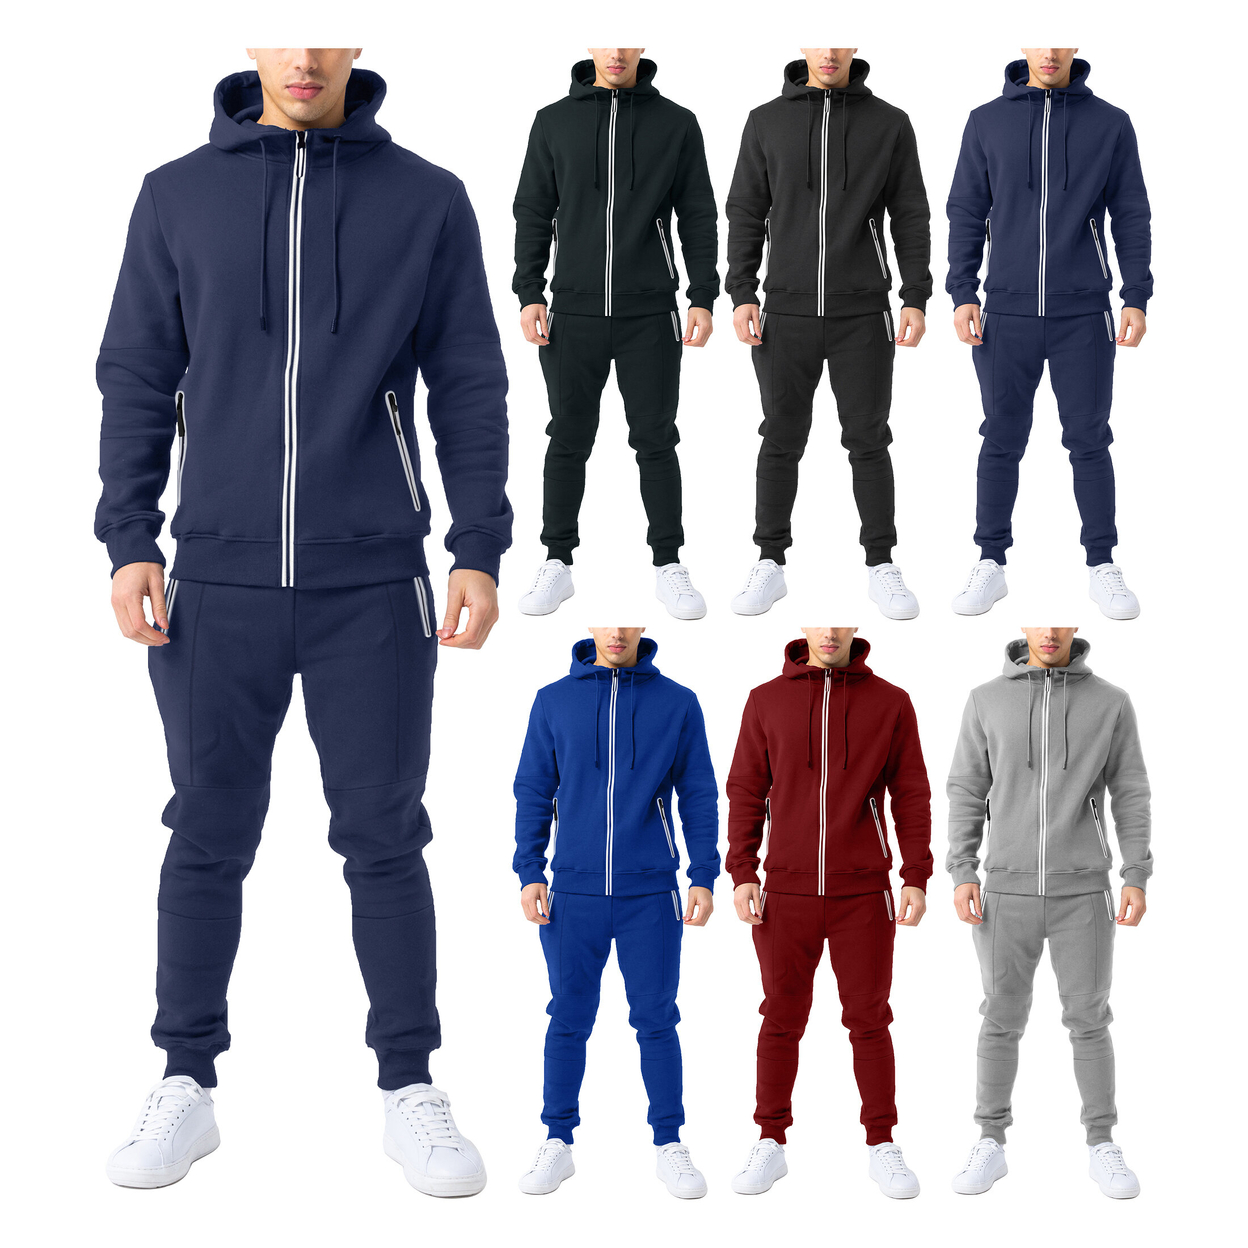 2-Pack: Men's Cozy Slim Fit Active Athletic Full Zip Hoodie And Jogger Tracksuit - Black & Blue, 3xl